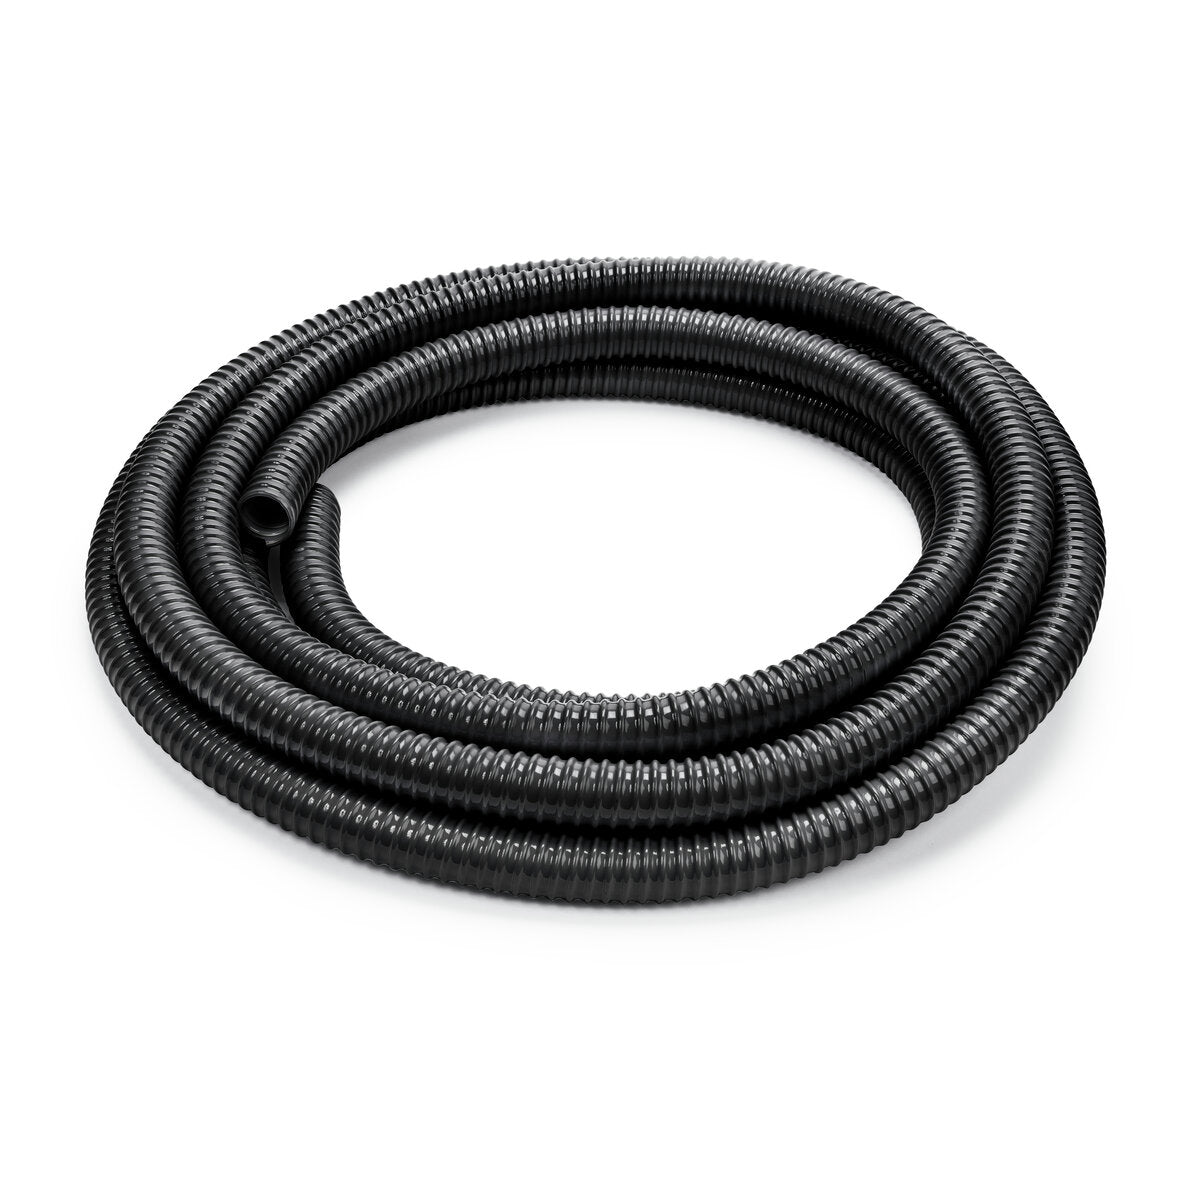 Lincoln Electric - Extraction Hose, 1 in. (25mm) Diameter (ID) x 8 ft. (2.5m) Length - K4111-8